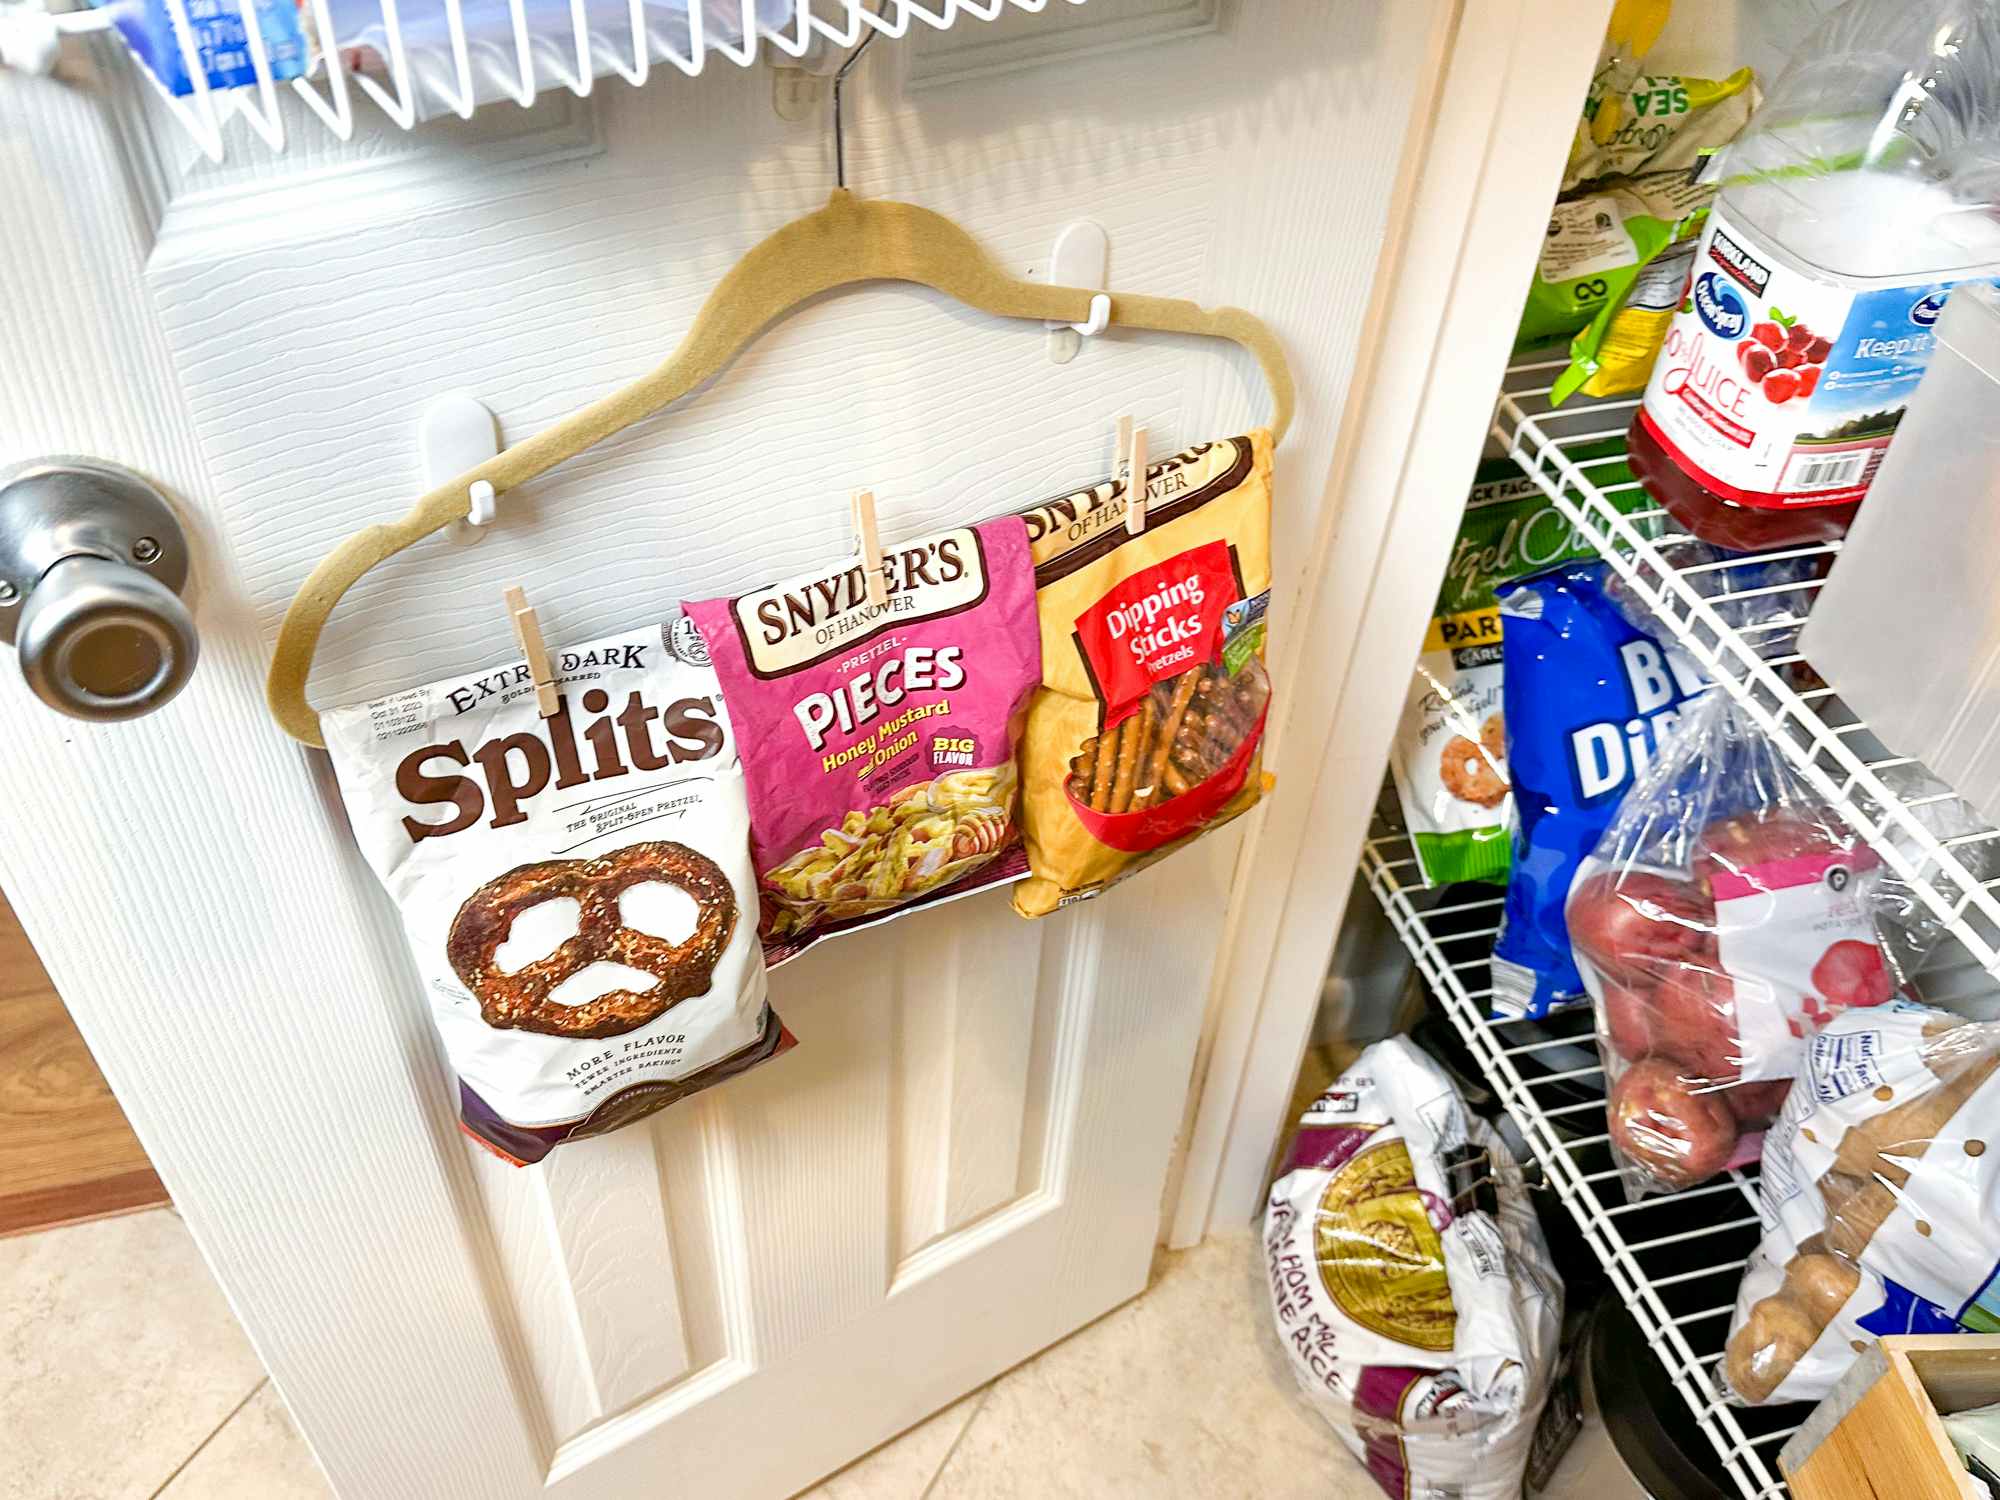 https://prod-cdn-thekrazycouponlady.imgix.net/wp-content/uploads/2017/02/how-to-organize-pantry-food-organization-open-chip-pretzel-bags-clip-to-hanger-inside-pantry-clothes-pins-1679417702-1679417702.jpg?auto=format&fit=fill&q=25